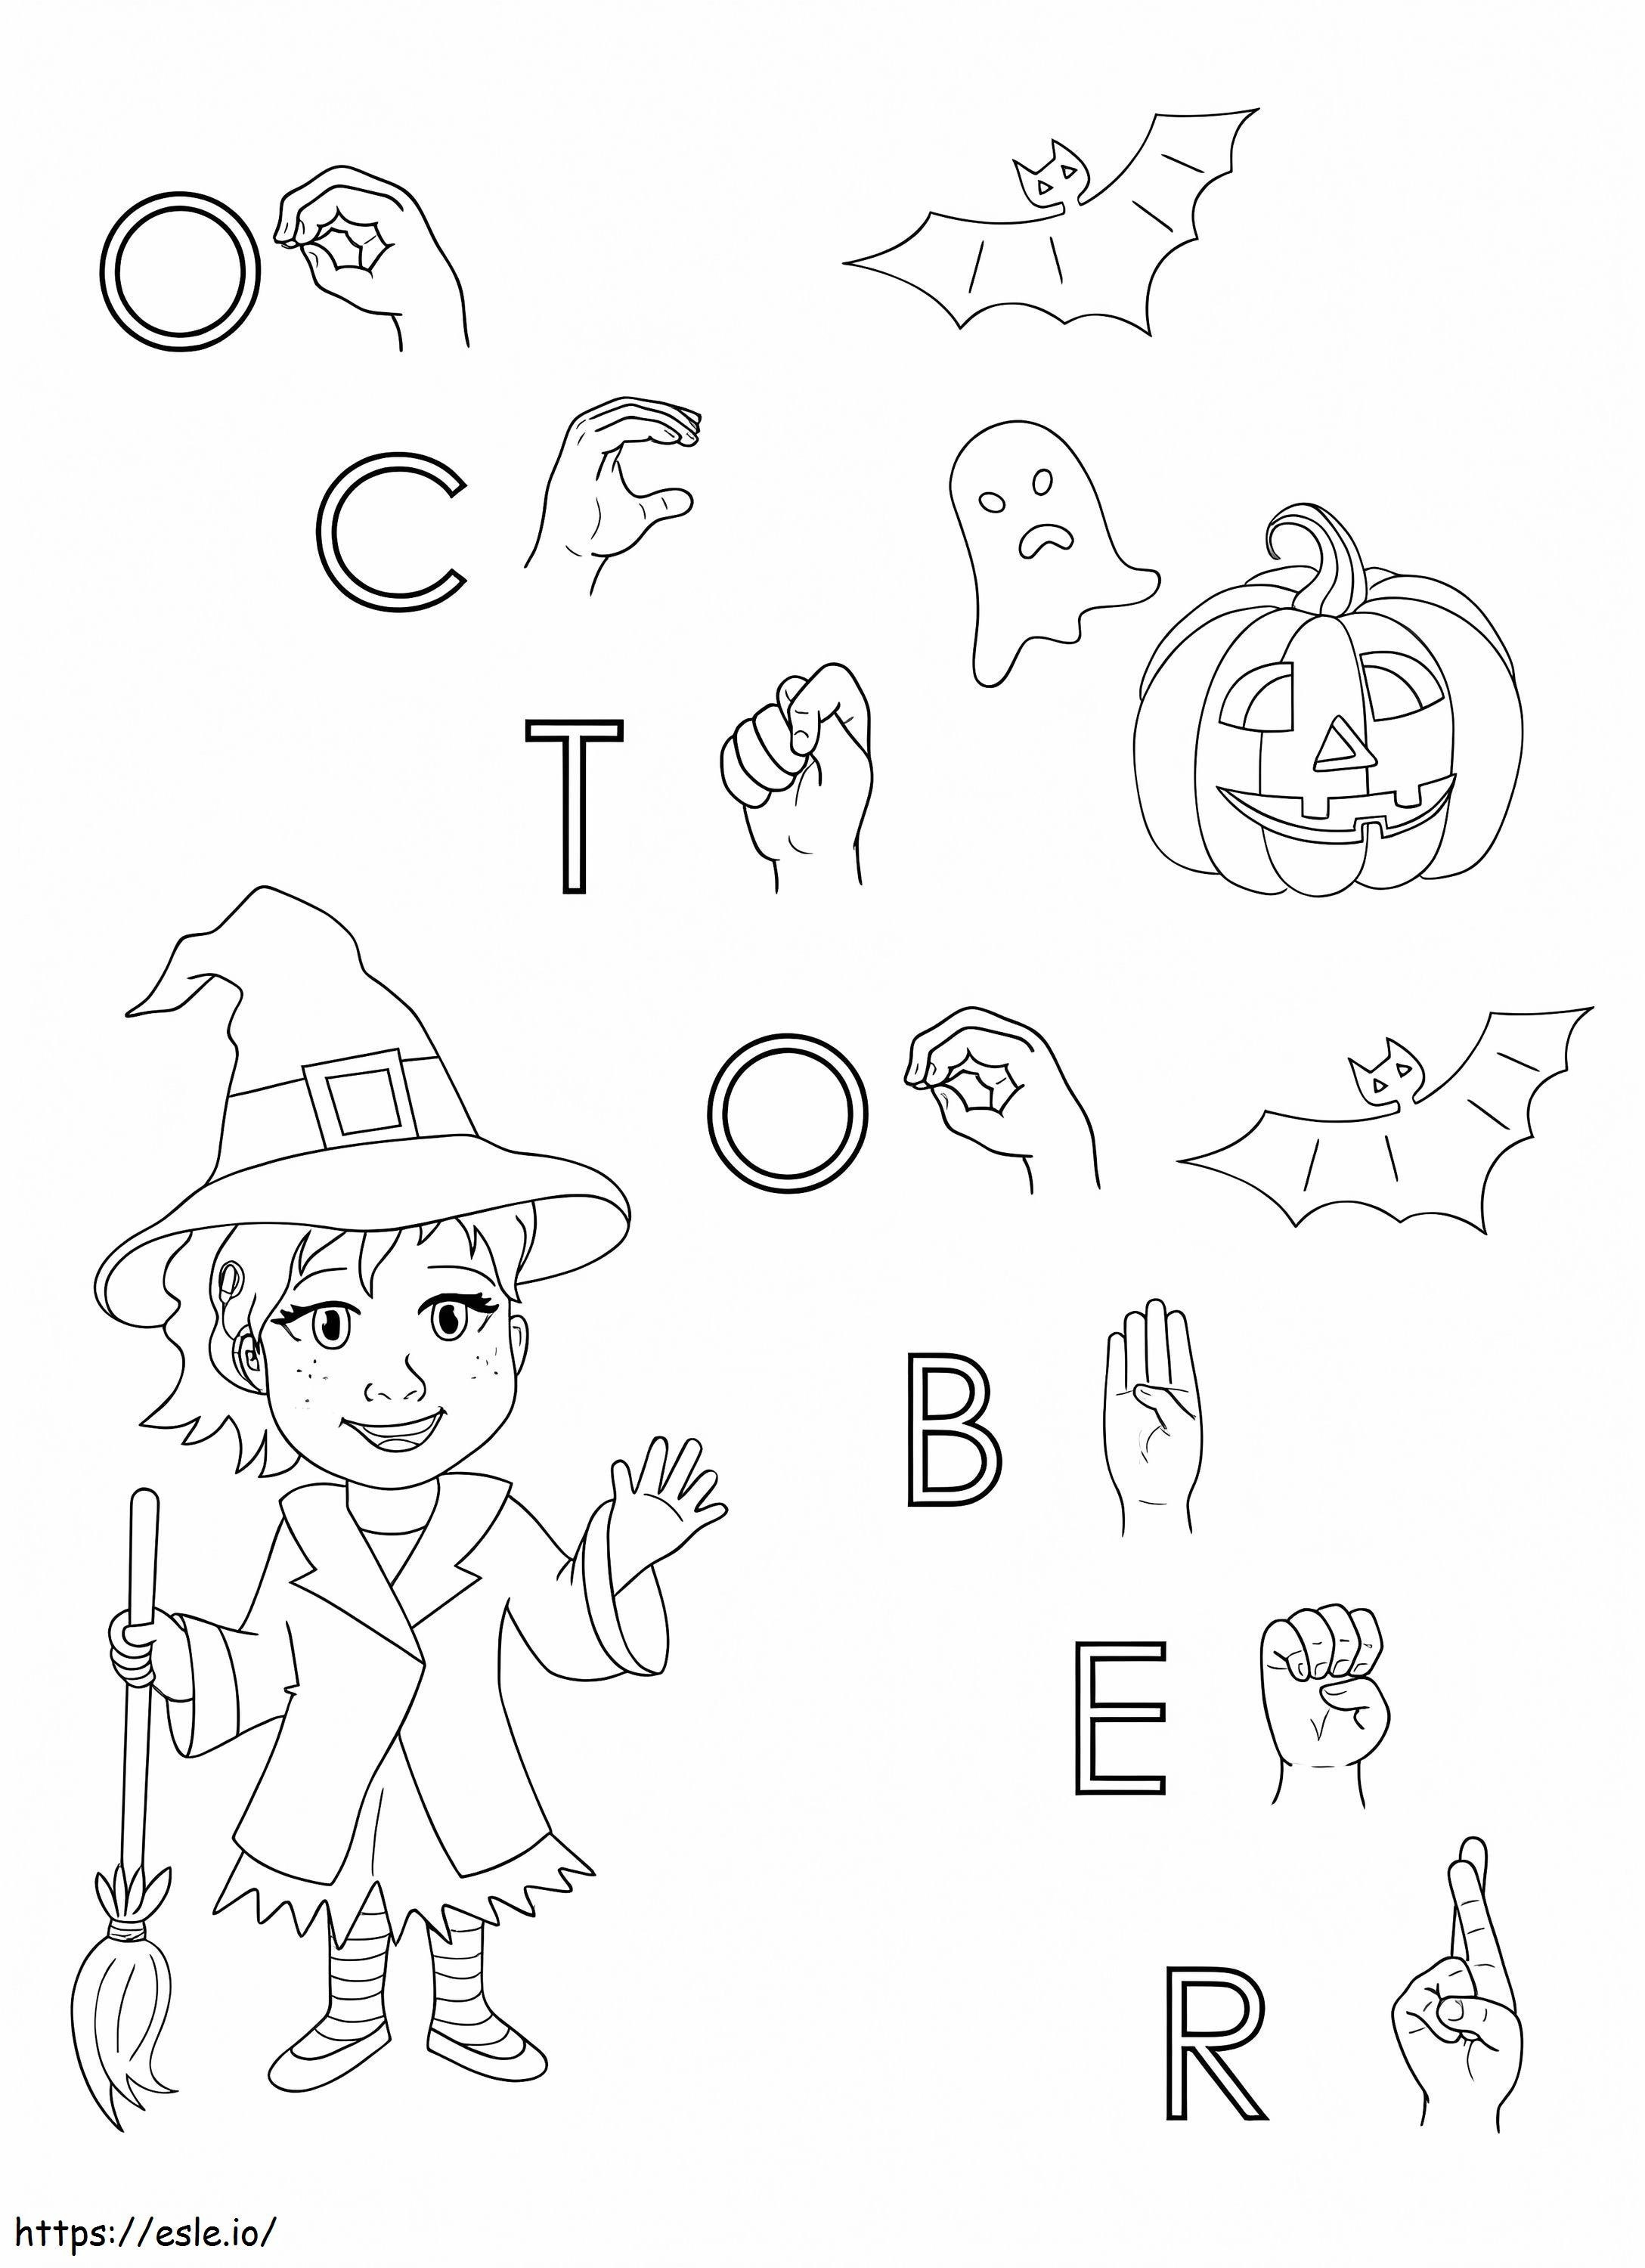 October With The People coloring page